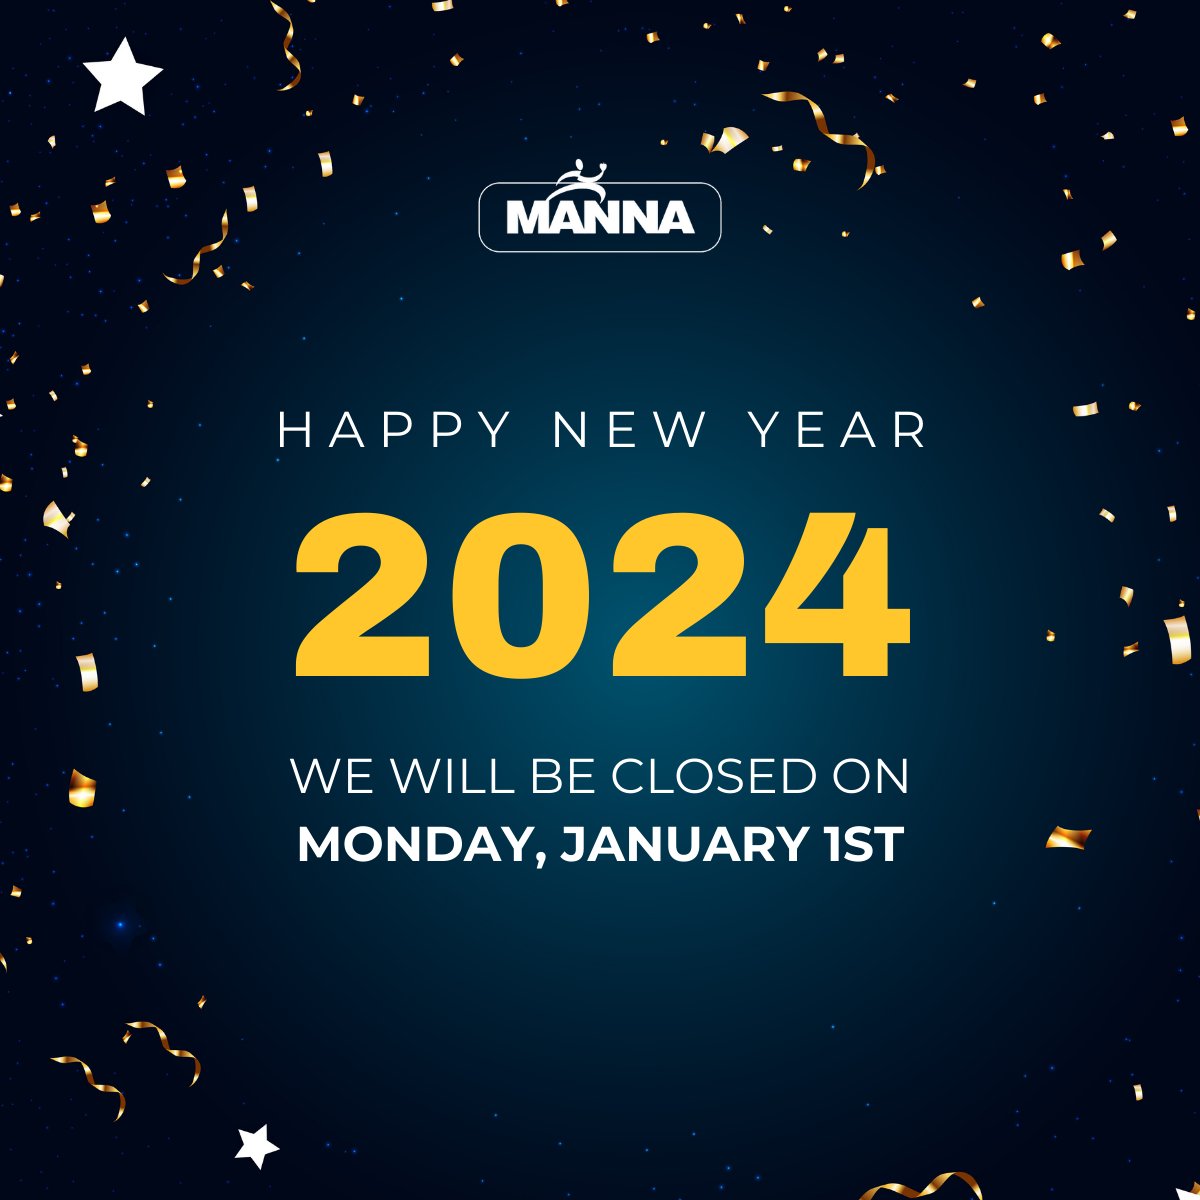 Wishing all of you a Happy New Year! Thank you to all our incredible volunteers, donors, and staff members who made 2023 the year of our 22 millionth meal! MANNA will be closed on Monday, 1/1/24 in observance of the New Year. Normal business hours will resume Tuesday, 1/2/24.